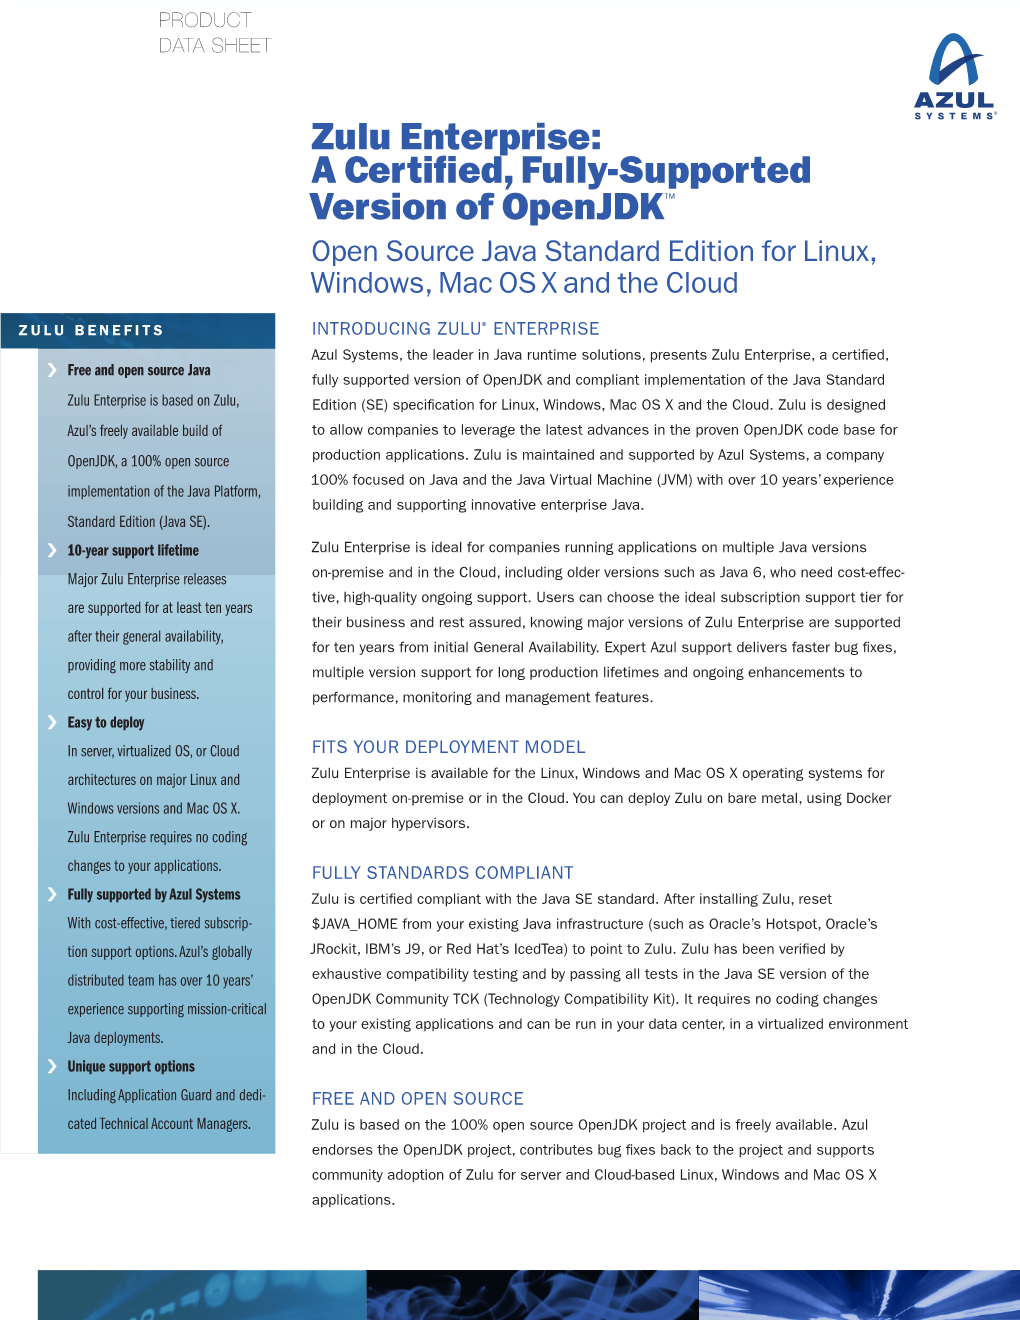 Zulu Enterprise: a Certiﬁed, Fully-Supported Version of Openjdk™ Open Source Java Standard Edition for Linux, Windows, Mac OS X and the Cloud